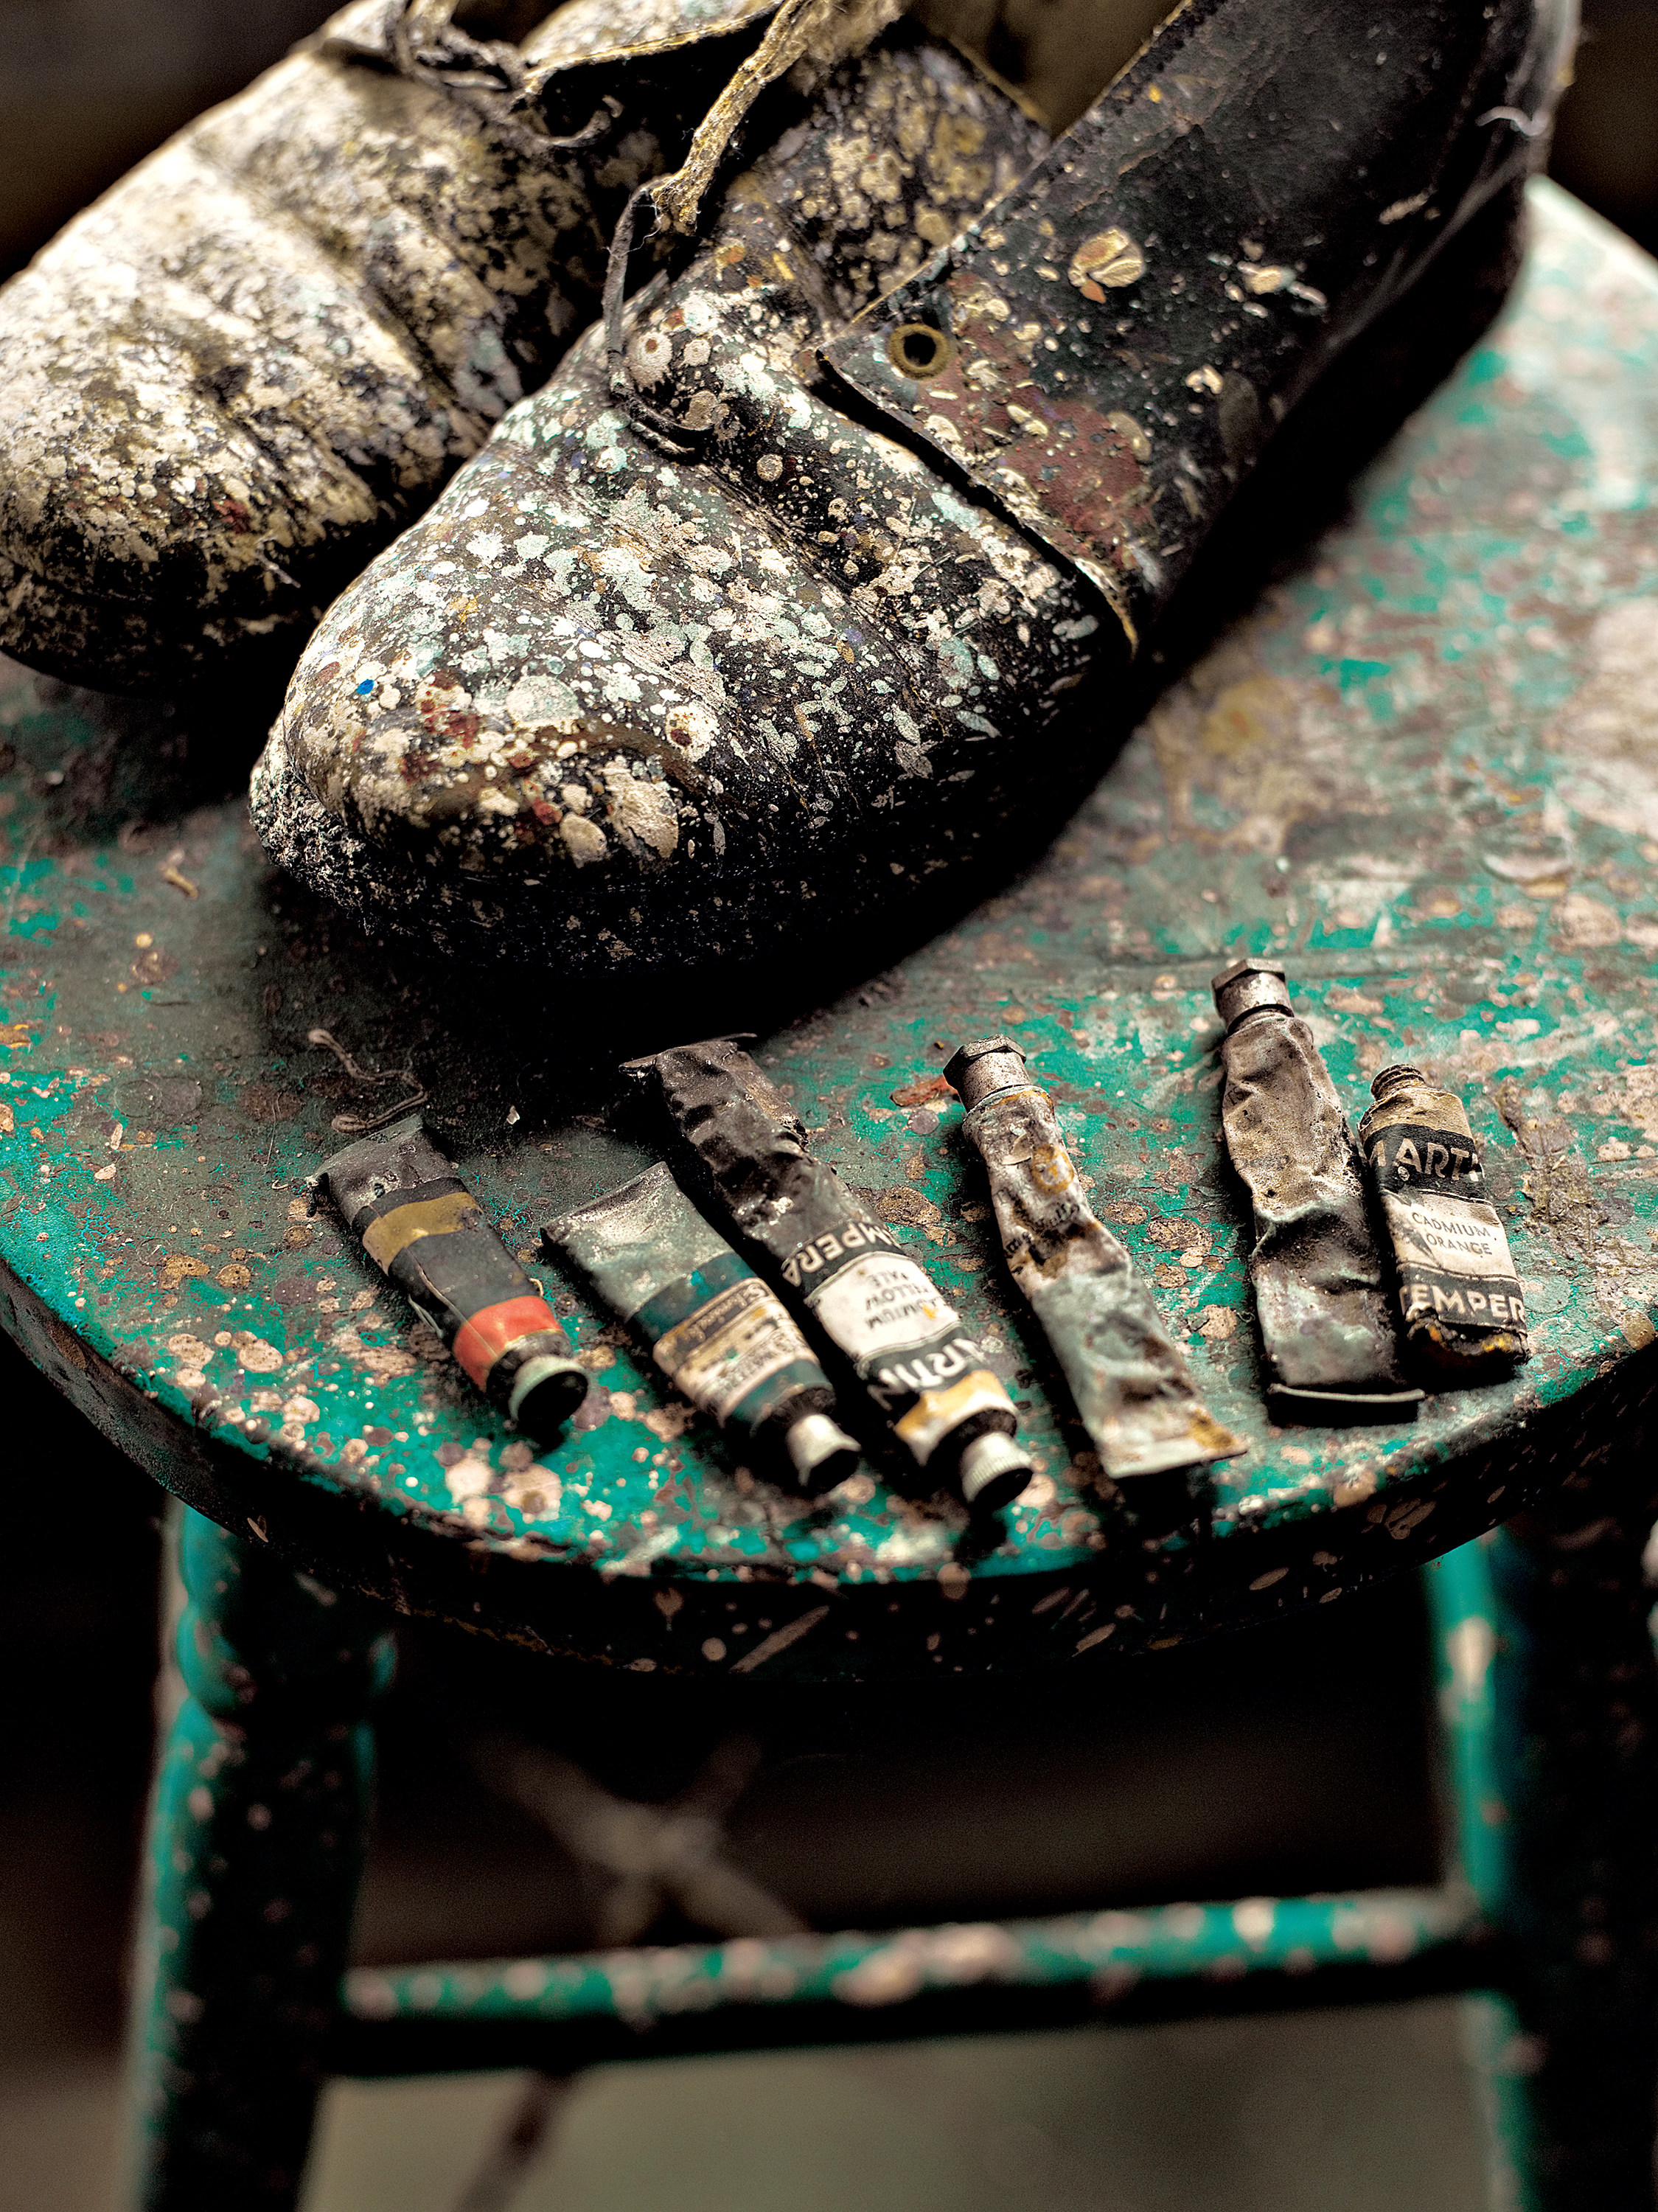  3 -® Robyn Lea_Painting shoes and stool_Pollock Studio.jpg